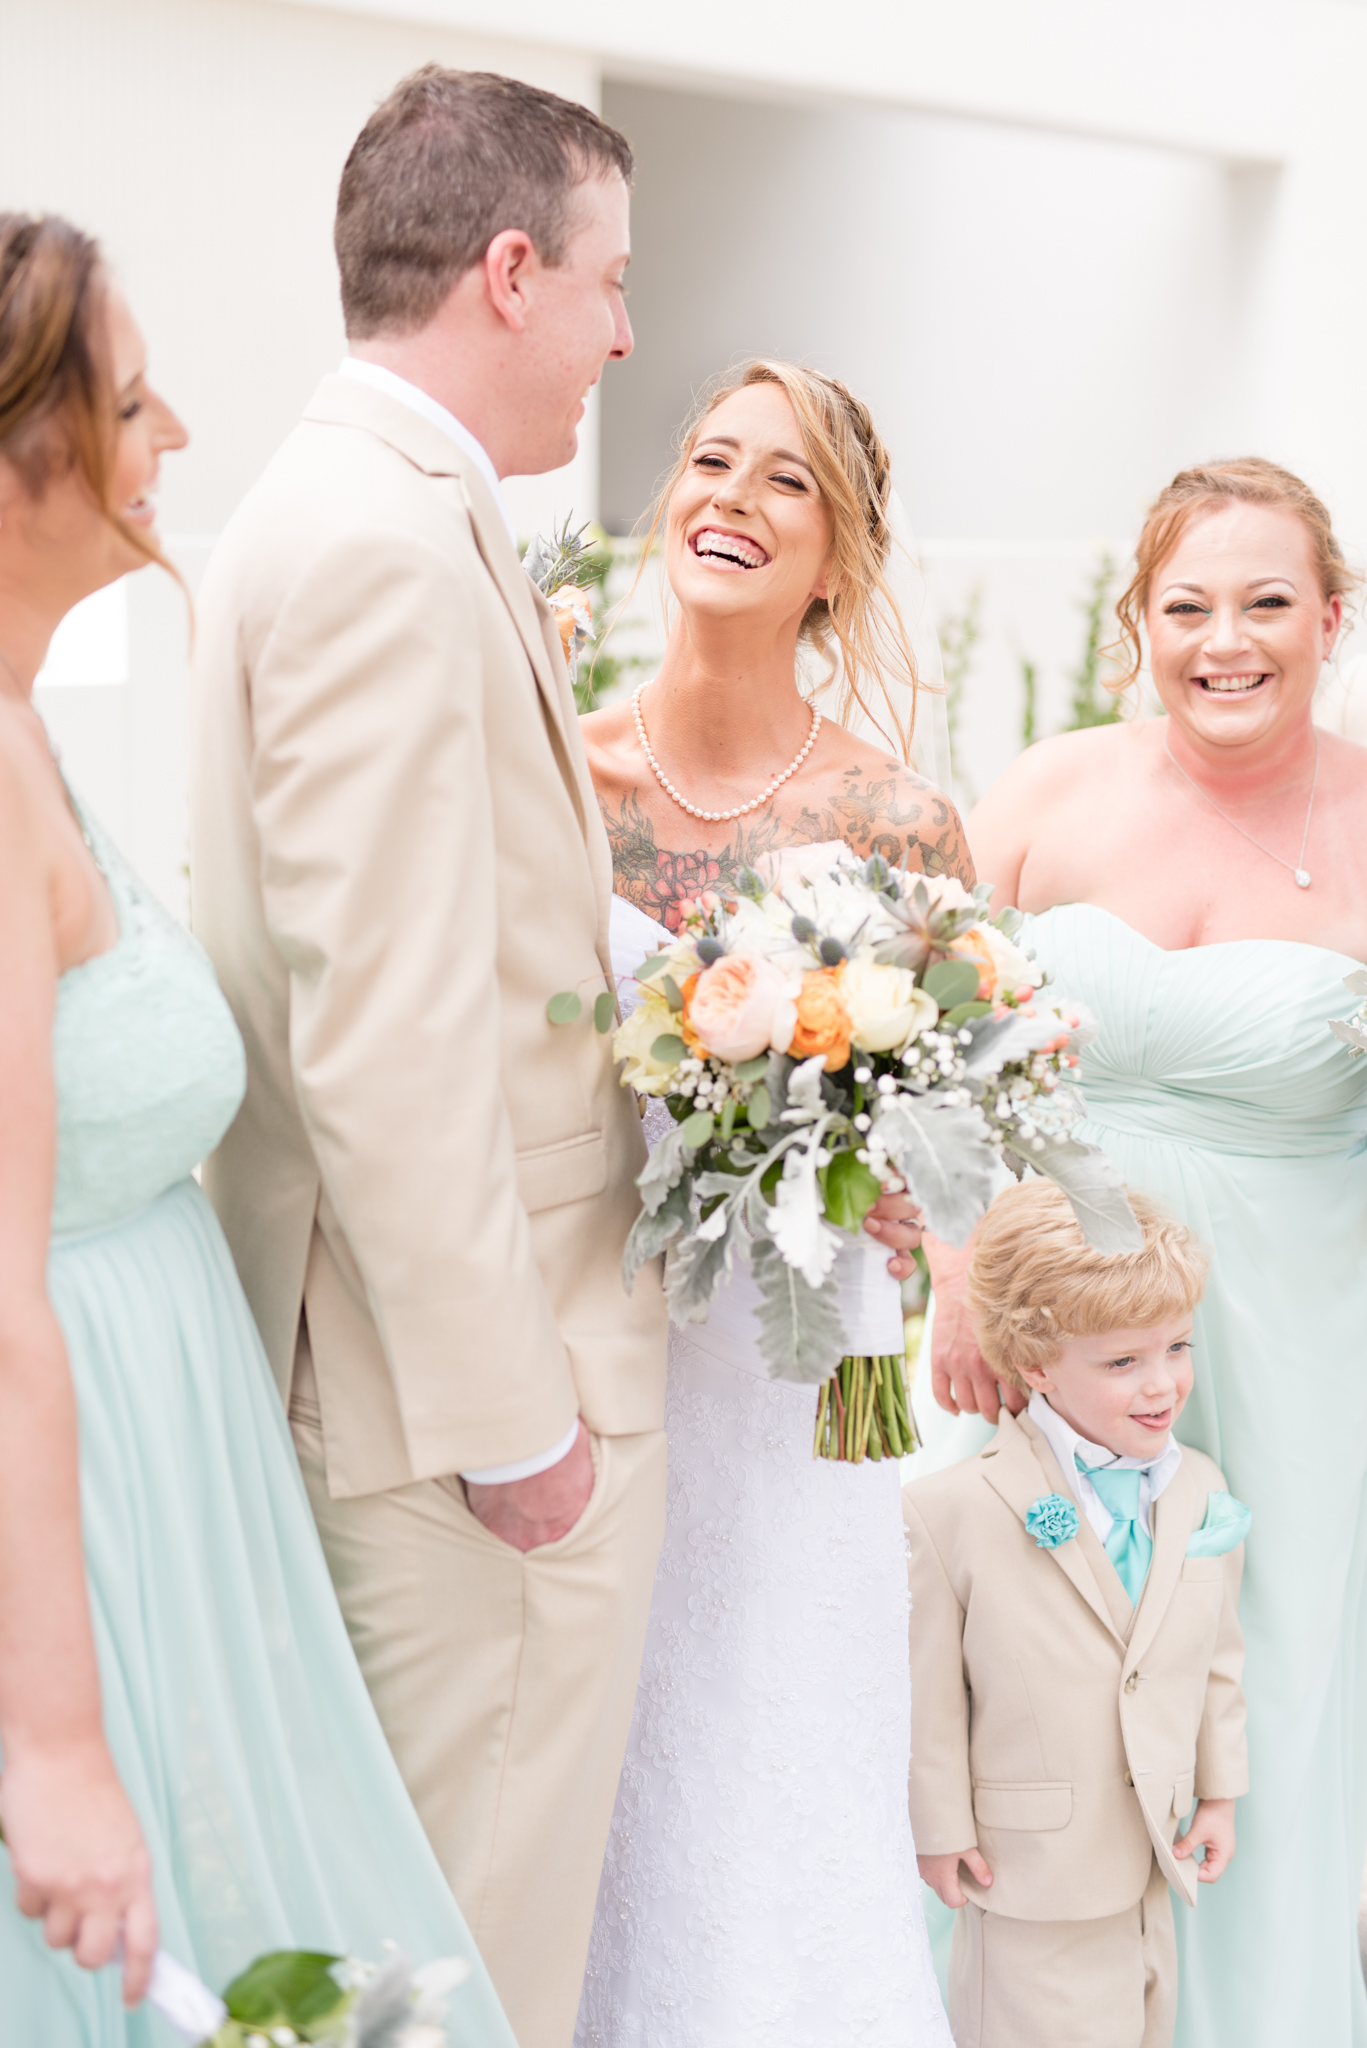 Bride laughs with groom and wedding party.